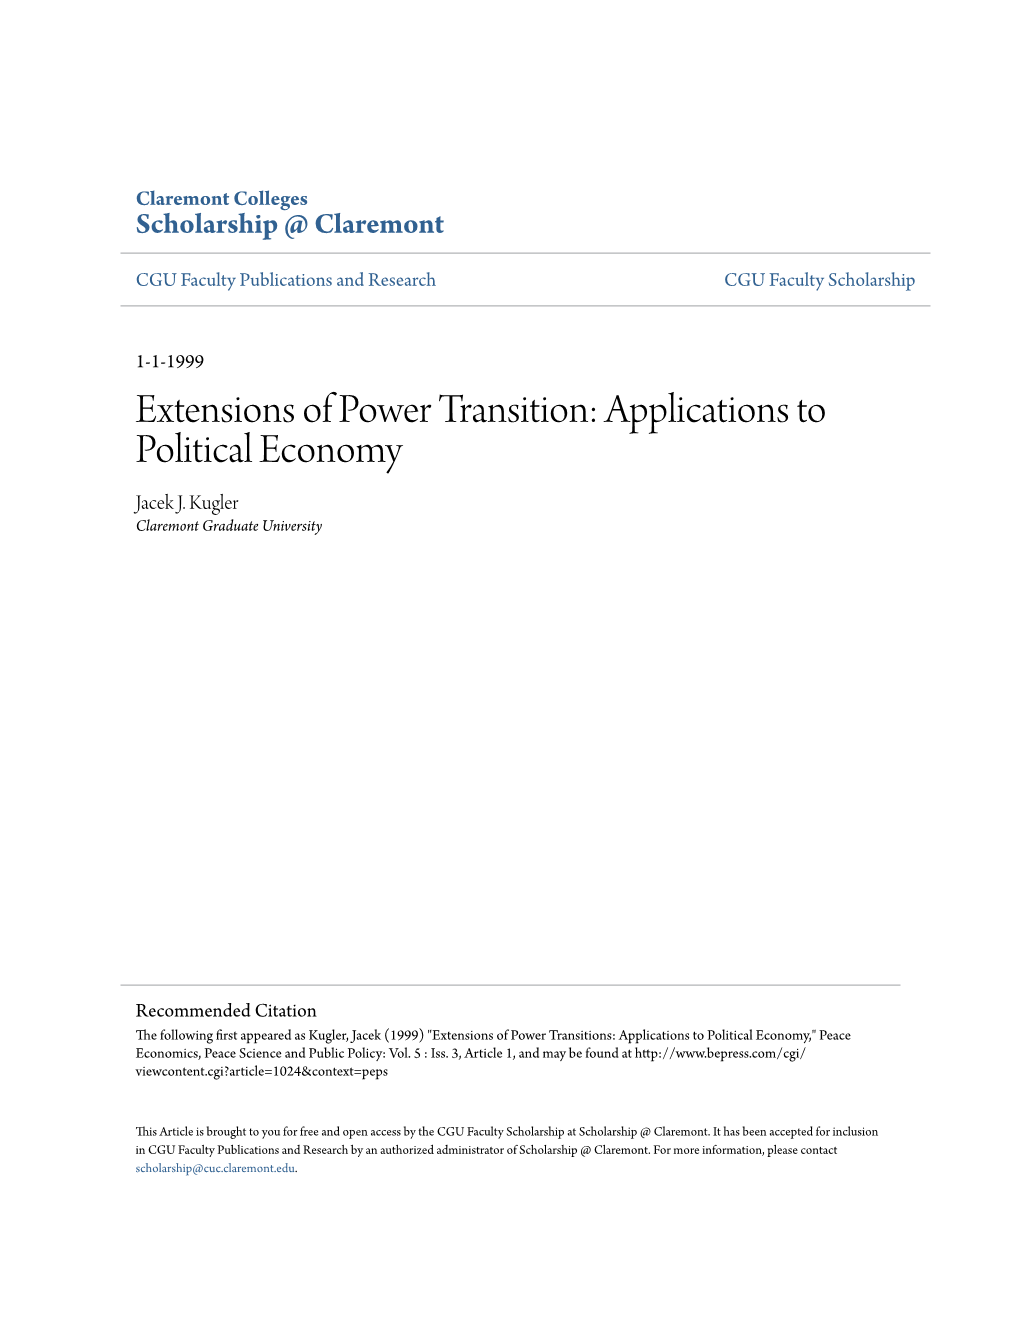 Extensions of Power Transition: Applications to Political Economy Jacek J